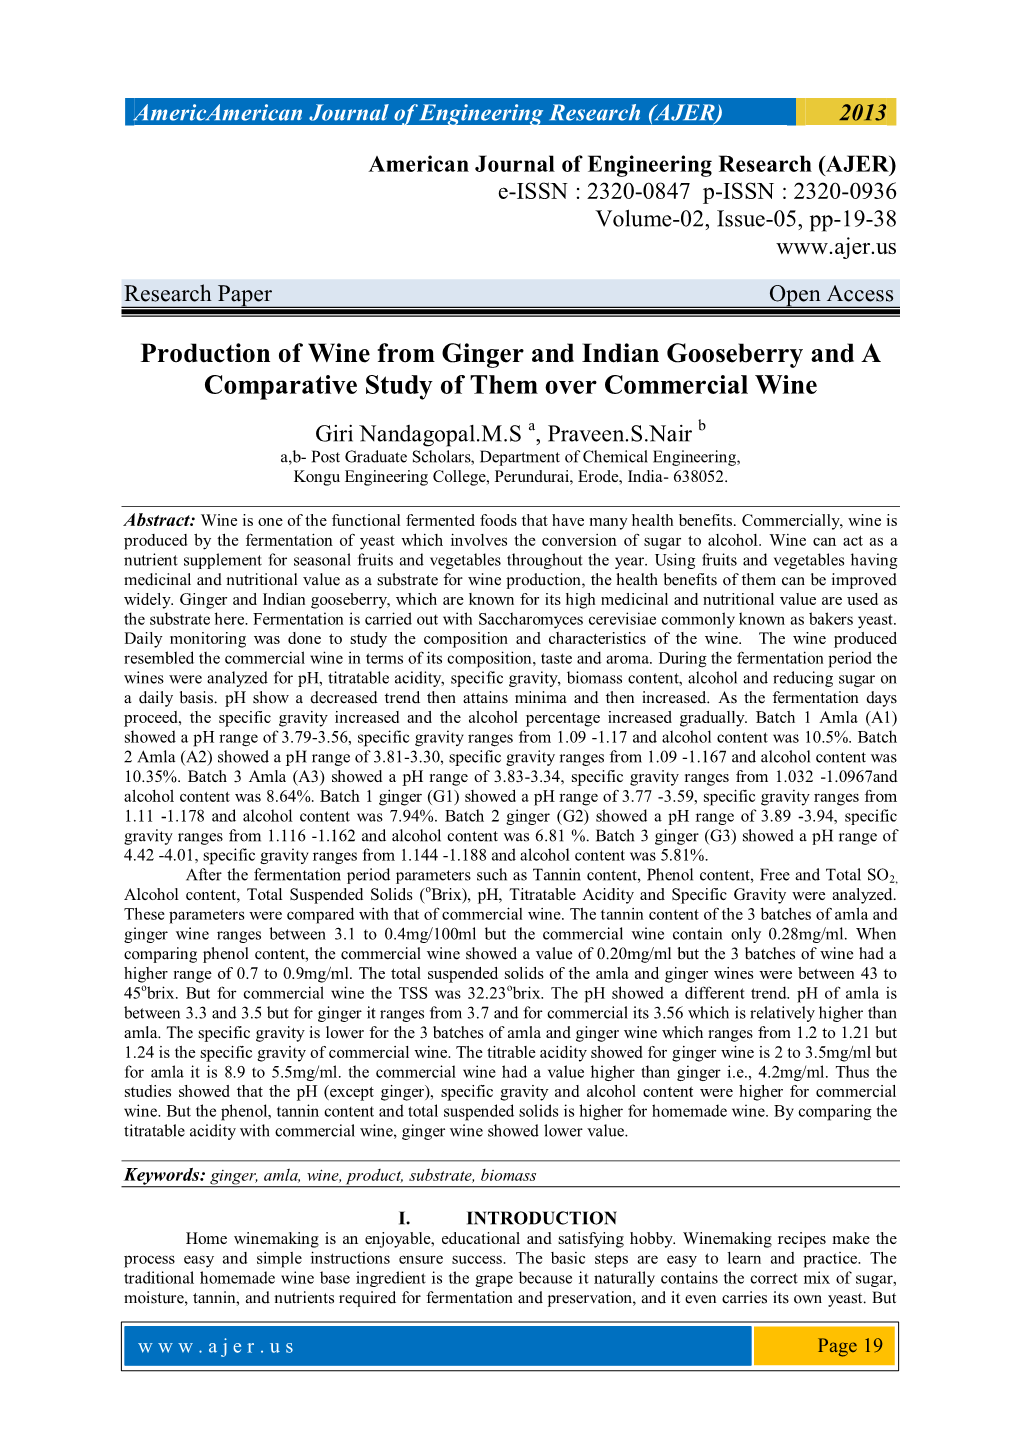 Production of Wine from Ginger and Indian Gooseberry and a Comparative Study of Them Over Commercial Wine